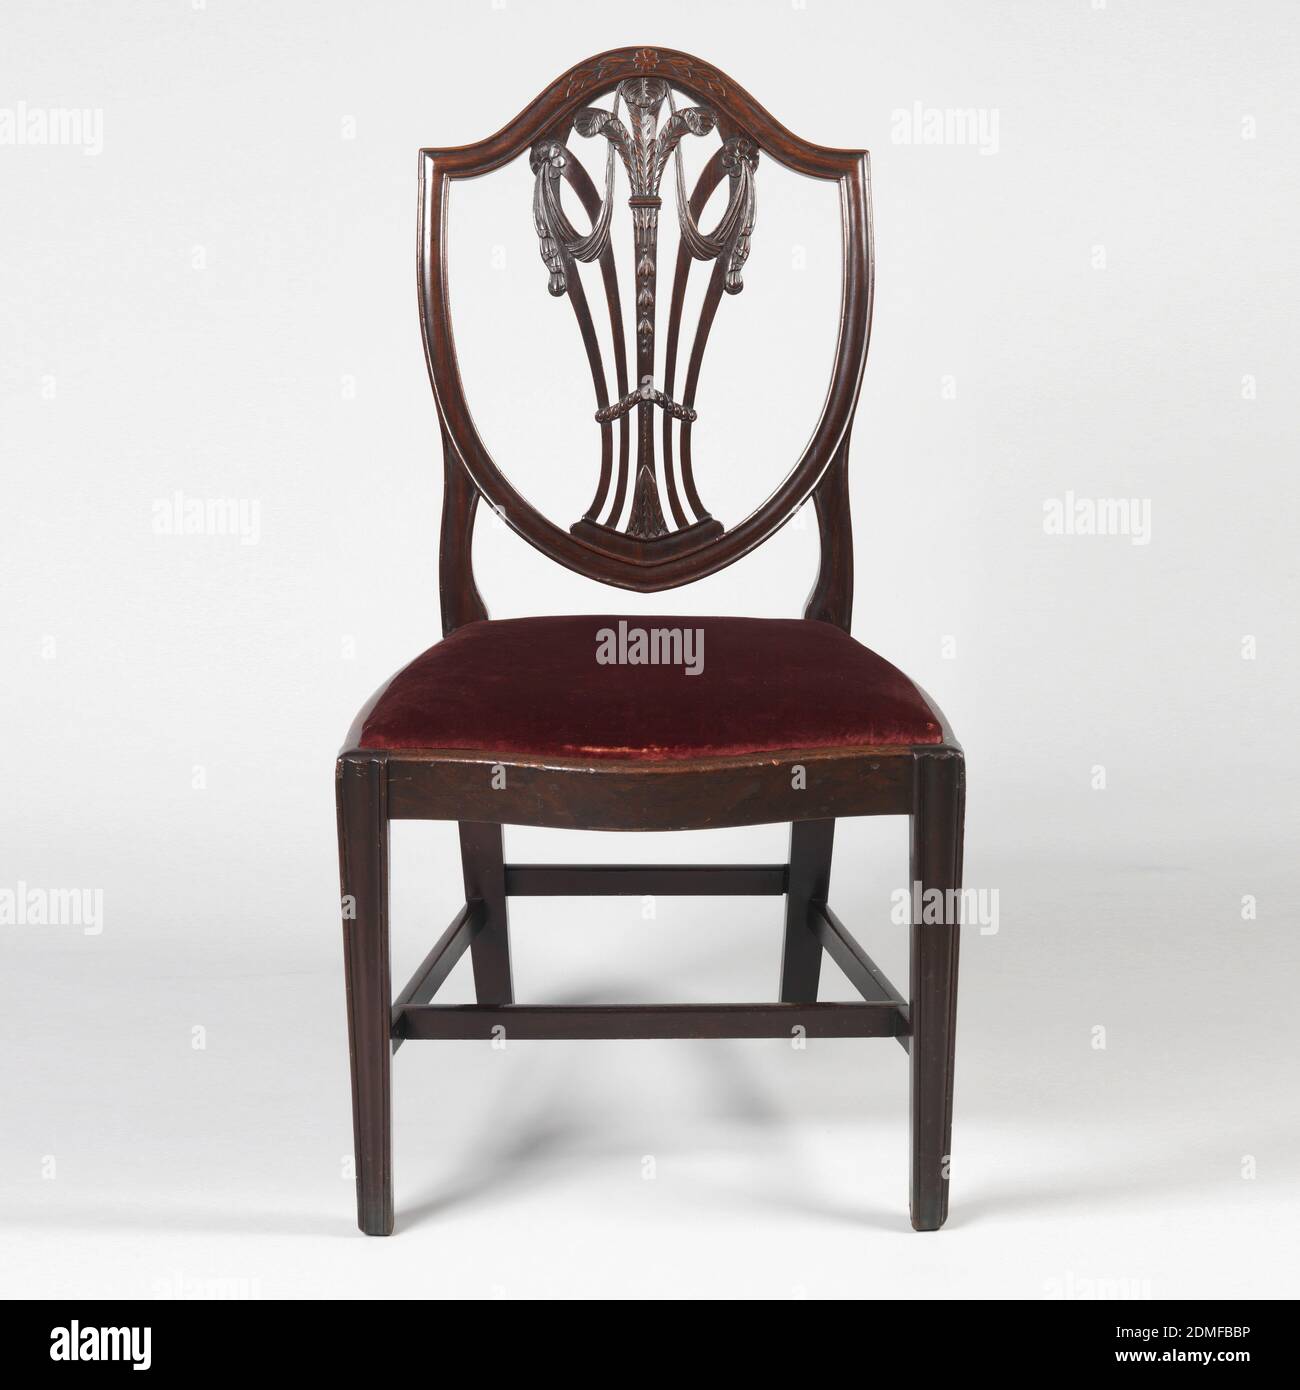 Side chair, Mahogany, Shield-shaped back. The vase shaped openwork vertical splat consists of five curved vertical slats-- the center one is carved with foliage at the base; the branches into three ostrich feathers. Splats on both sides curving outwards meet those on the outside in two rosettes, from which swags of drapery hang. The front legs are moulded and slightly tapered. Front seat rail is serpentine and side rails are bowed slightly. There is a drop in seat covered in silk solid cut stamped cloth velvet., England, ca. 1780, furniture, Decorative Arts, Side chair Stock Photo